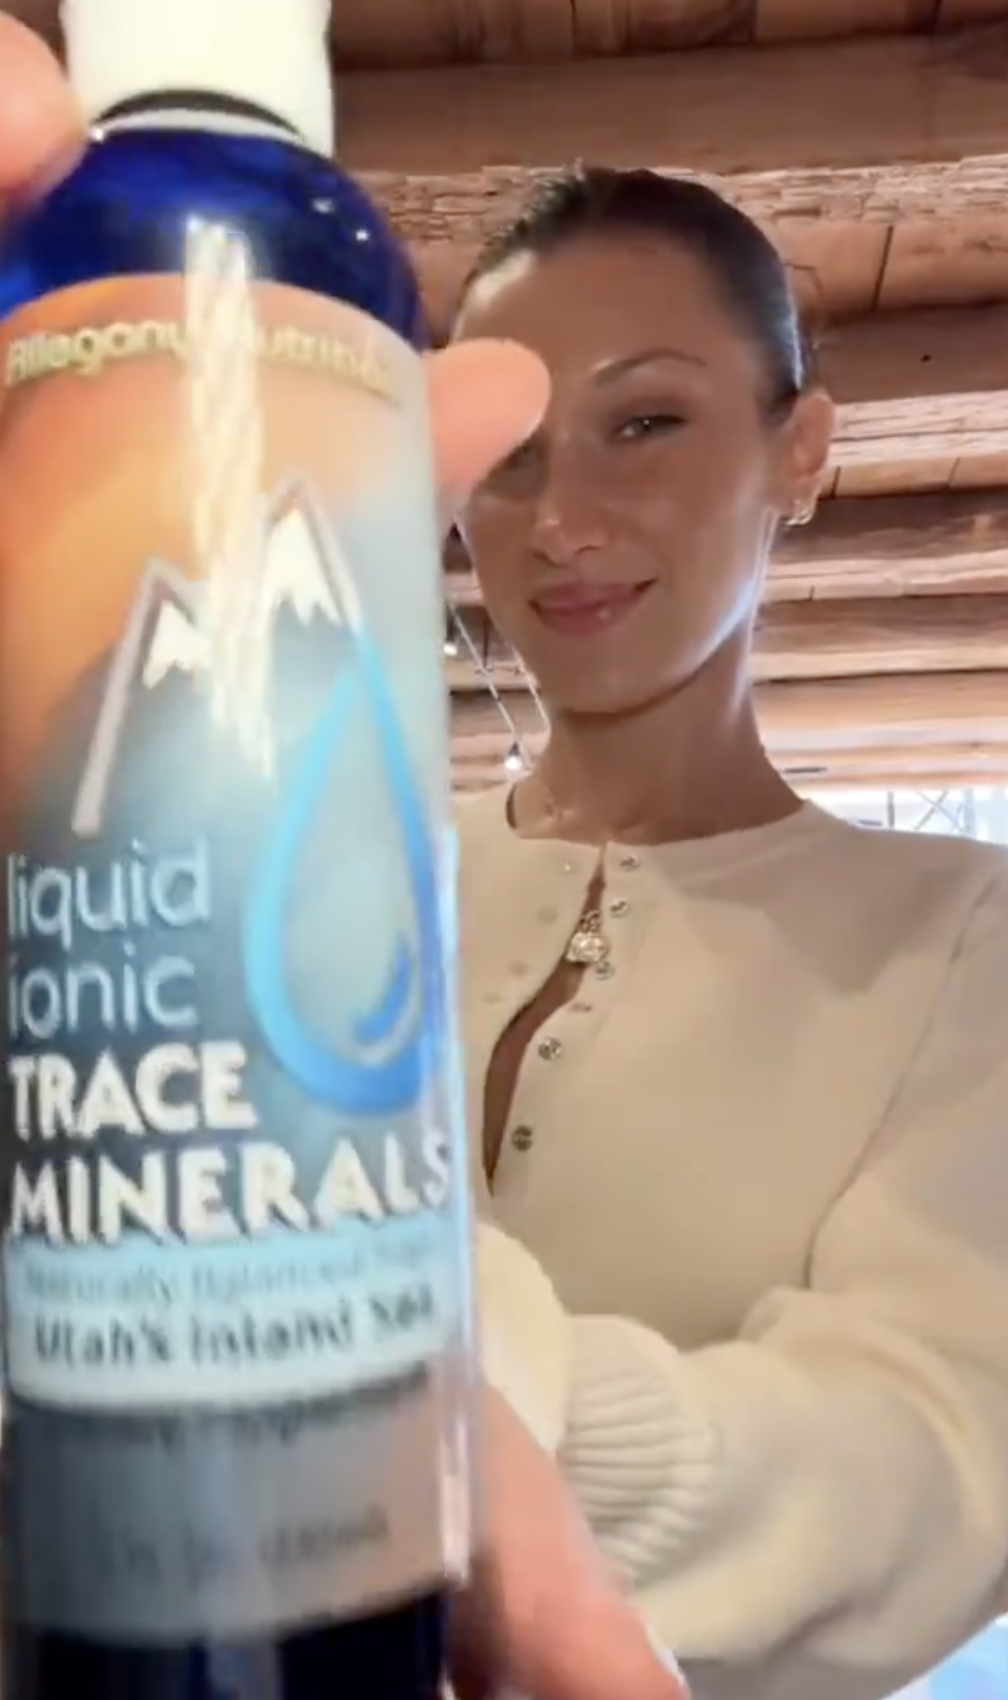 Bella holding a bottle of liquid ionic trace minerals, smiling at the camera